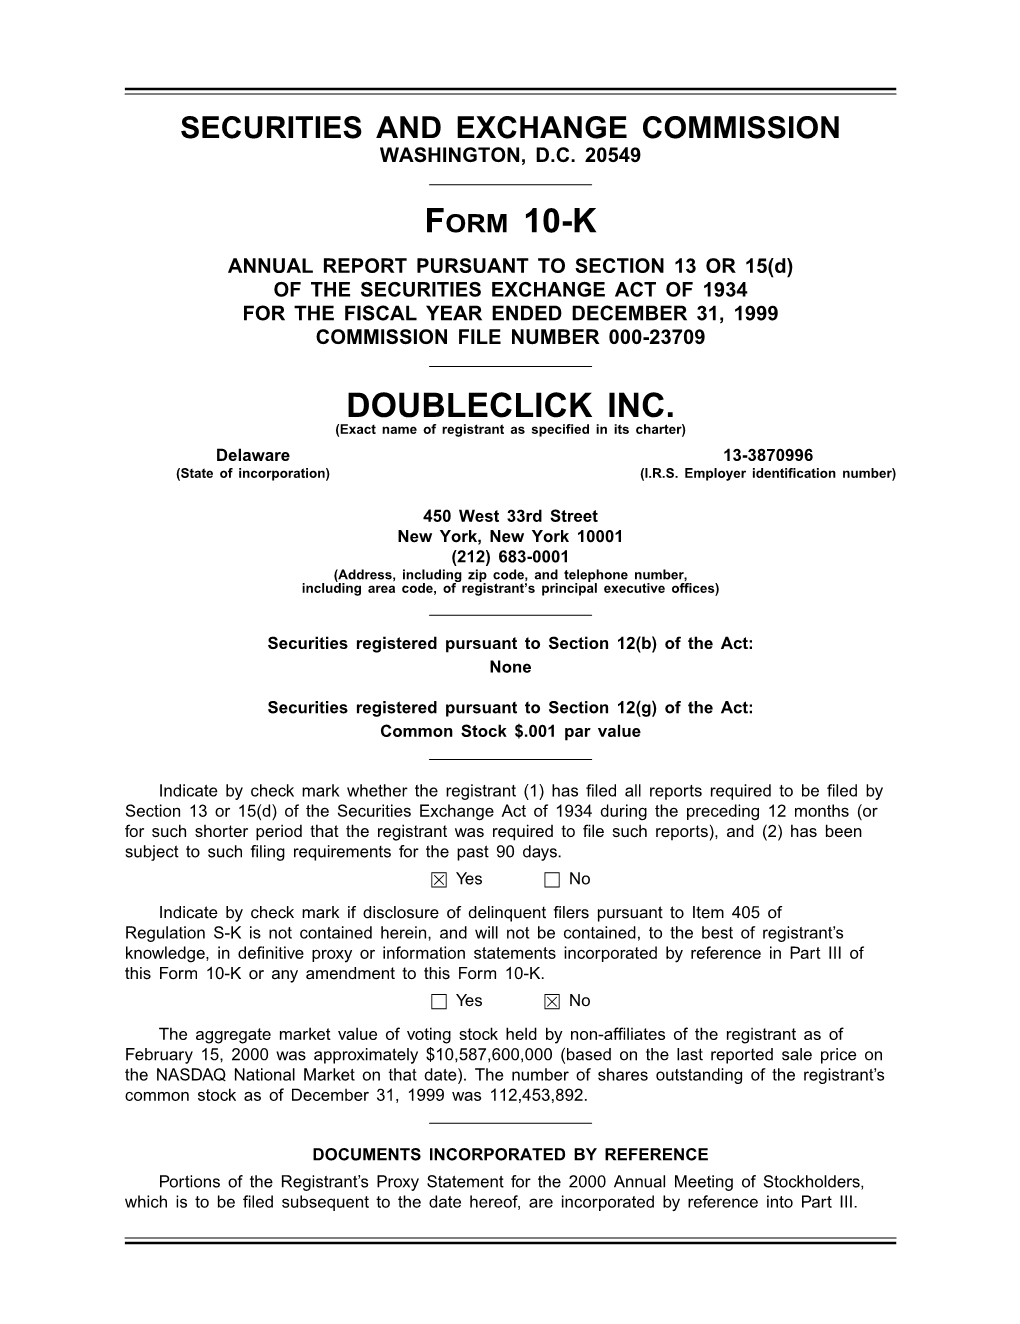 DOUBLECLICK INC. (Exact Name of Registrant As Specified in Its Charter) Delaware 13-3870996 (State of Incorporation) (I.R.S